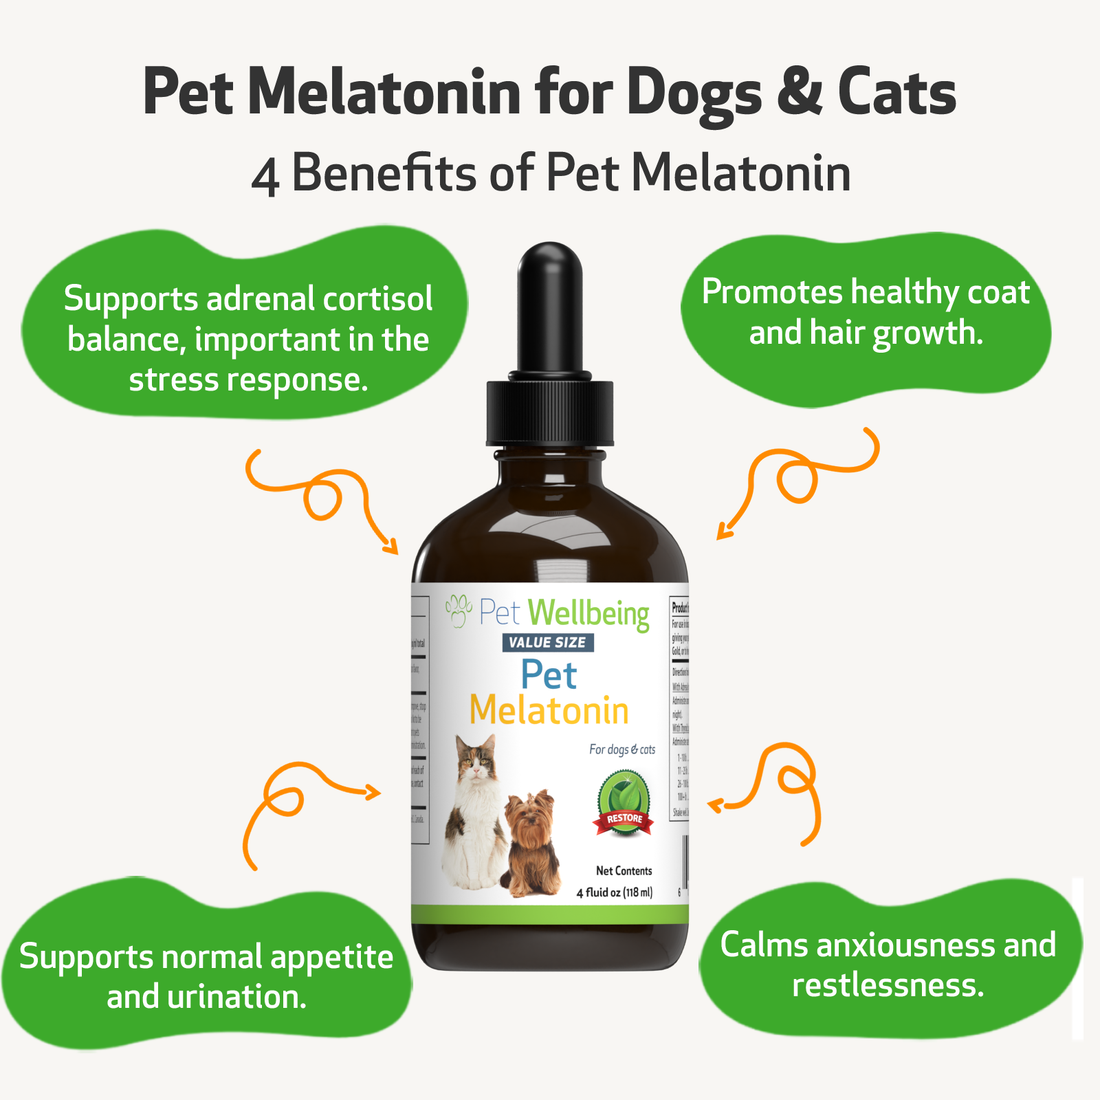 does melatonin help with hair growth in dogs